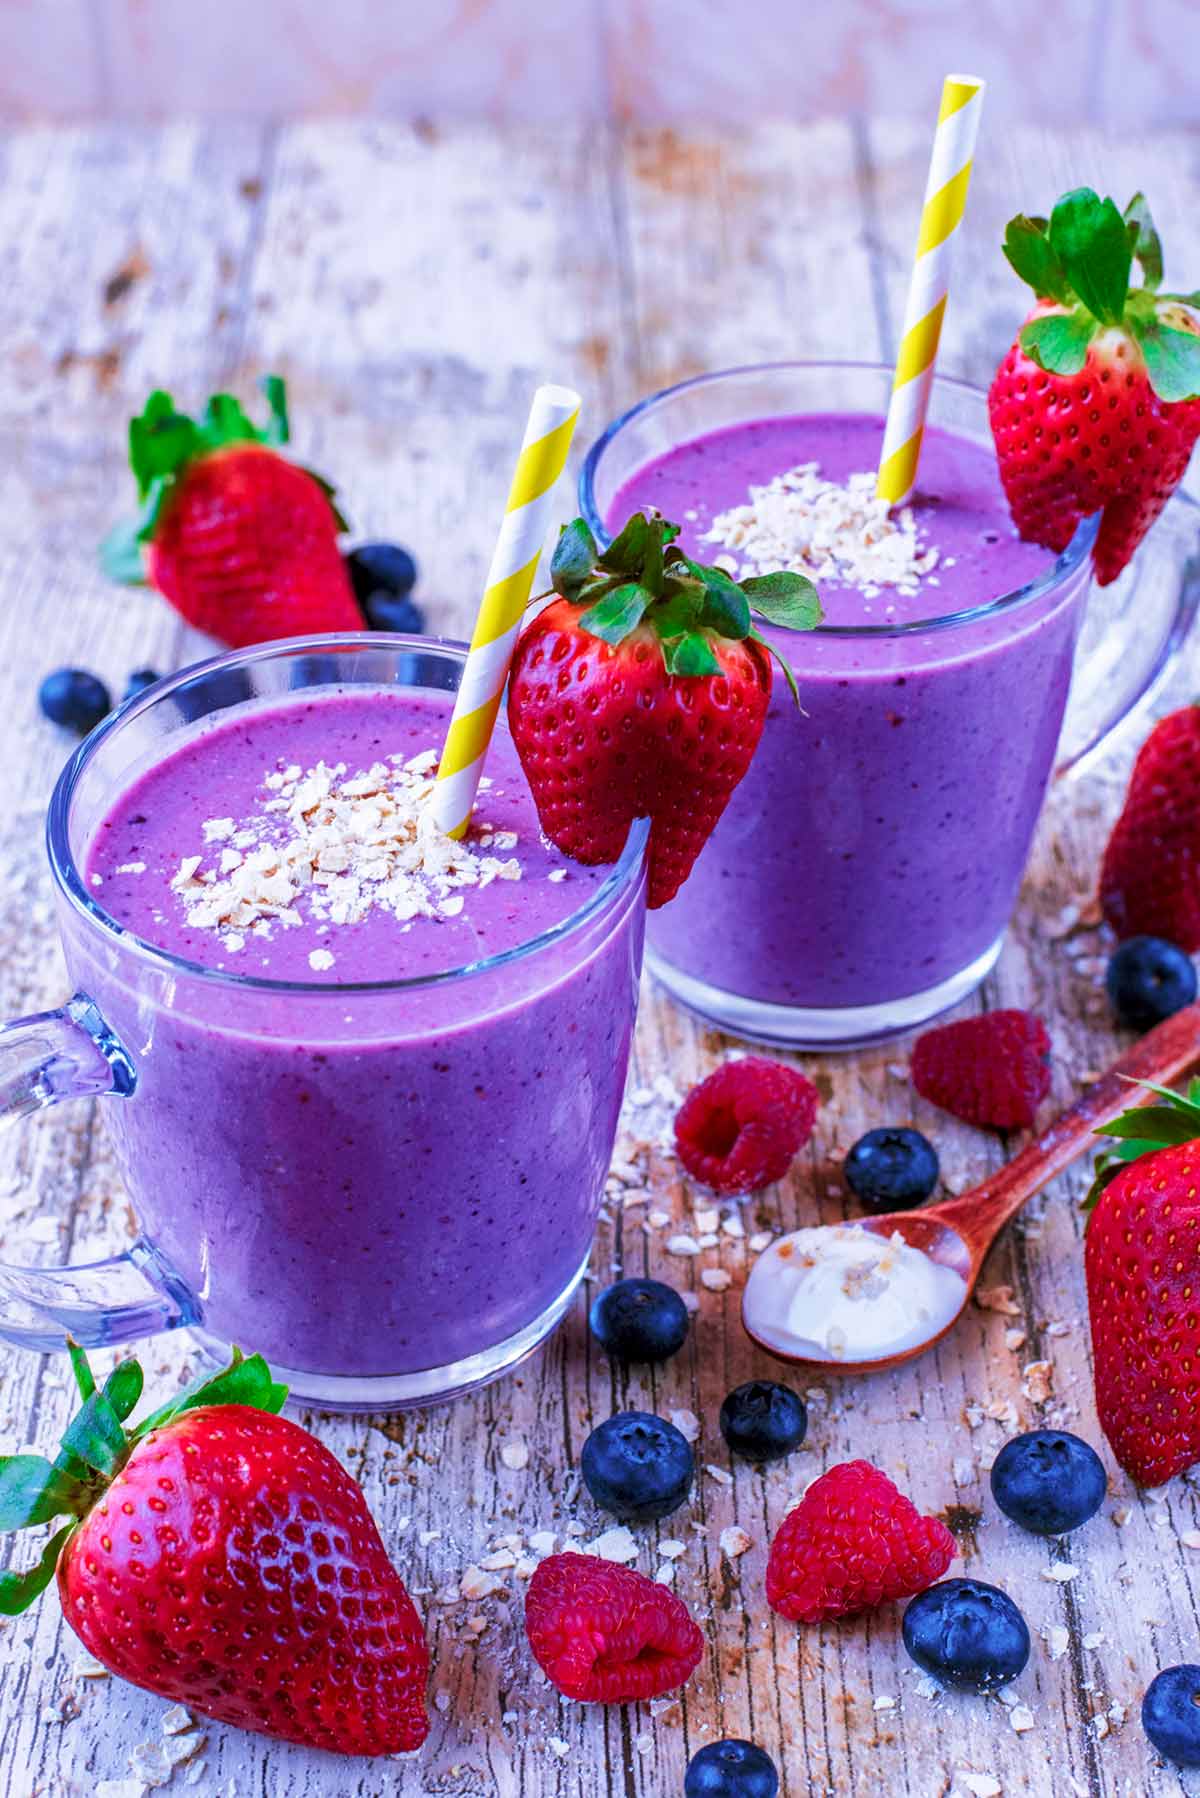 Two purple smoothies in glasses with straws, topped oats and strawberries.